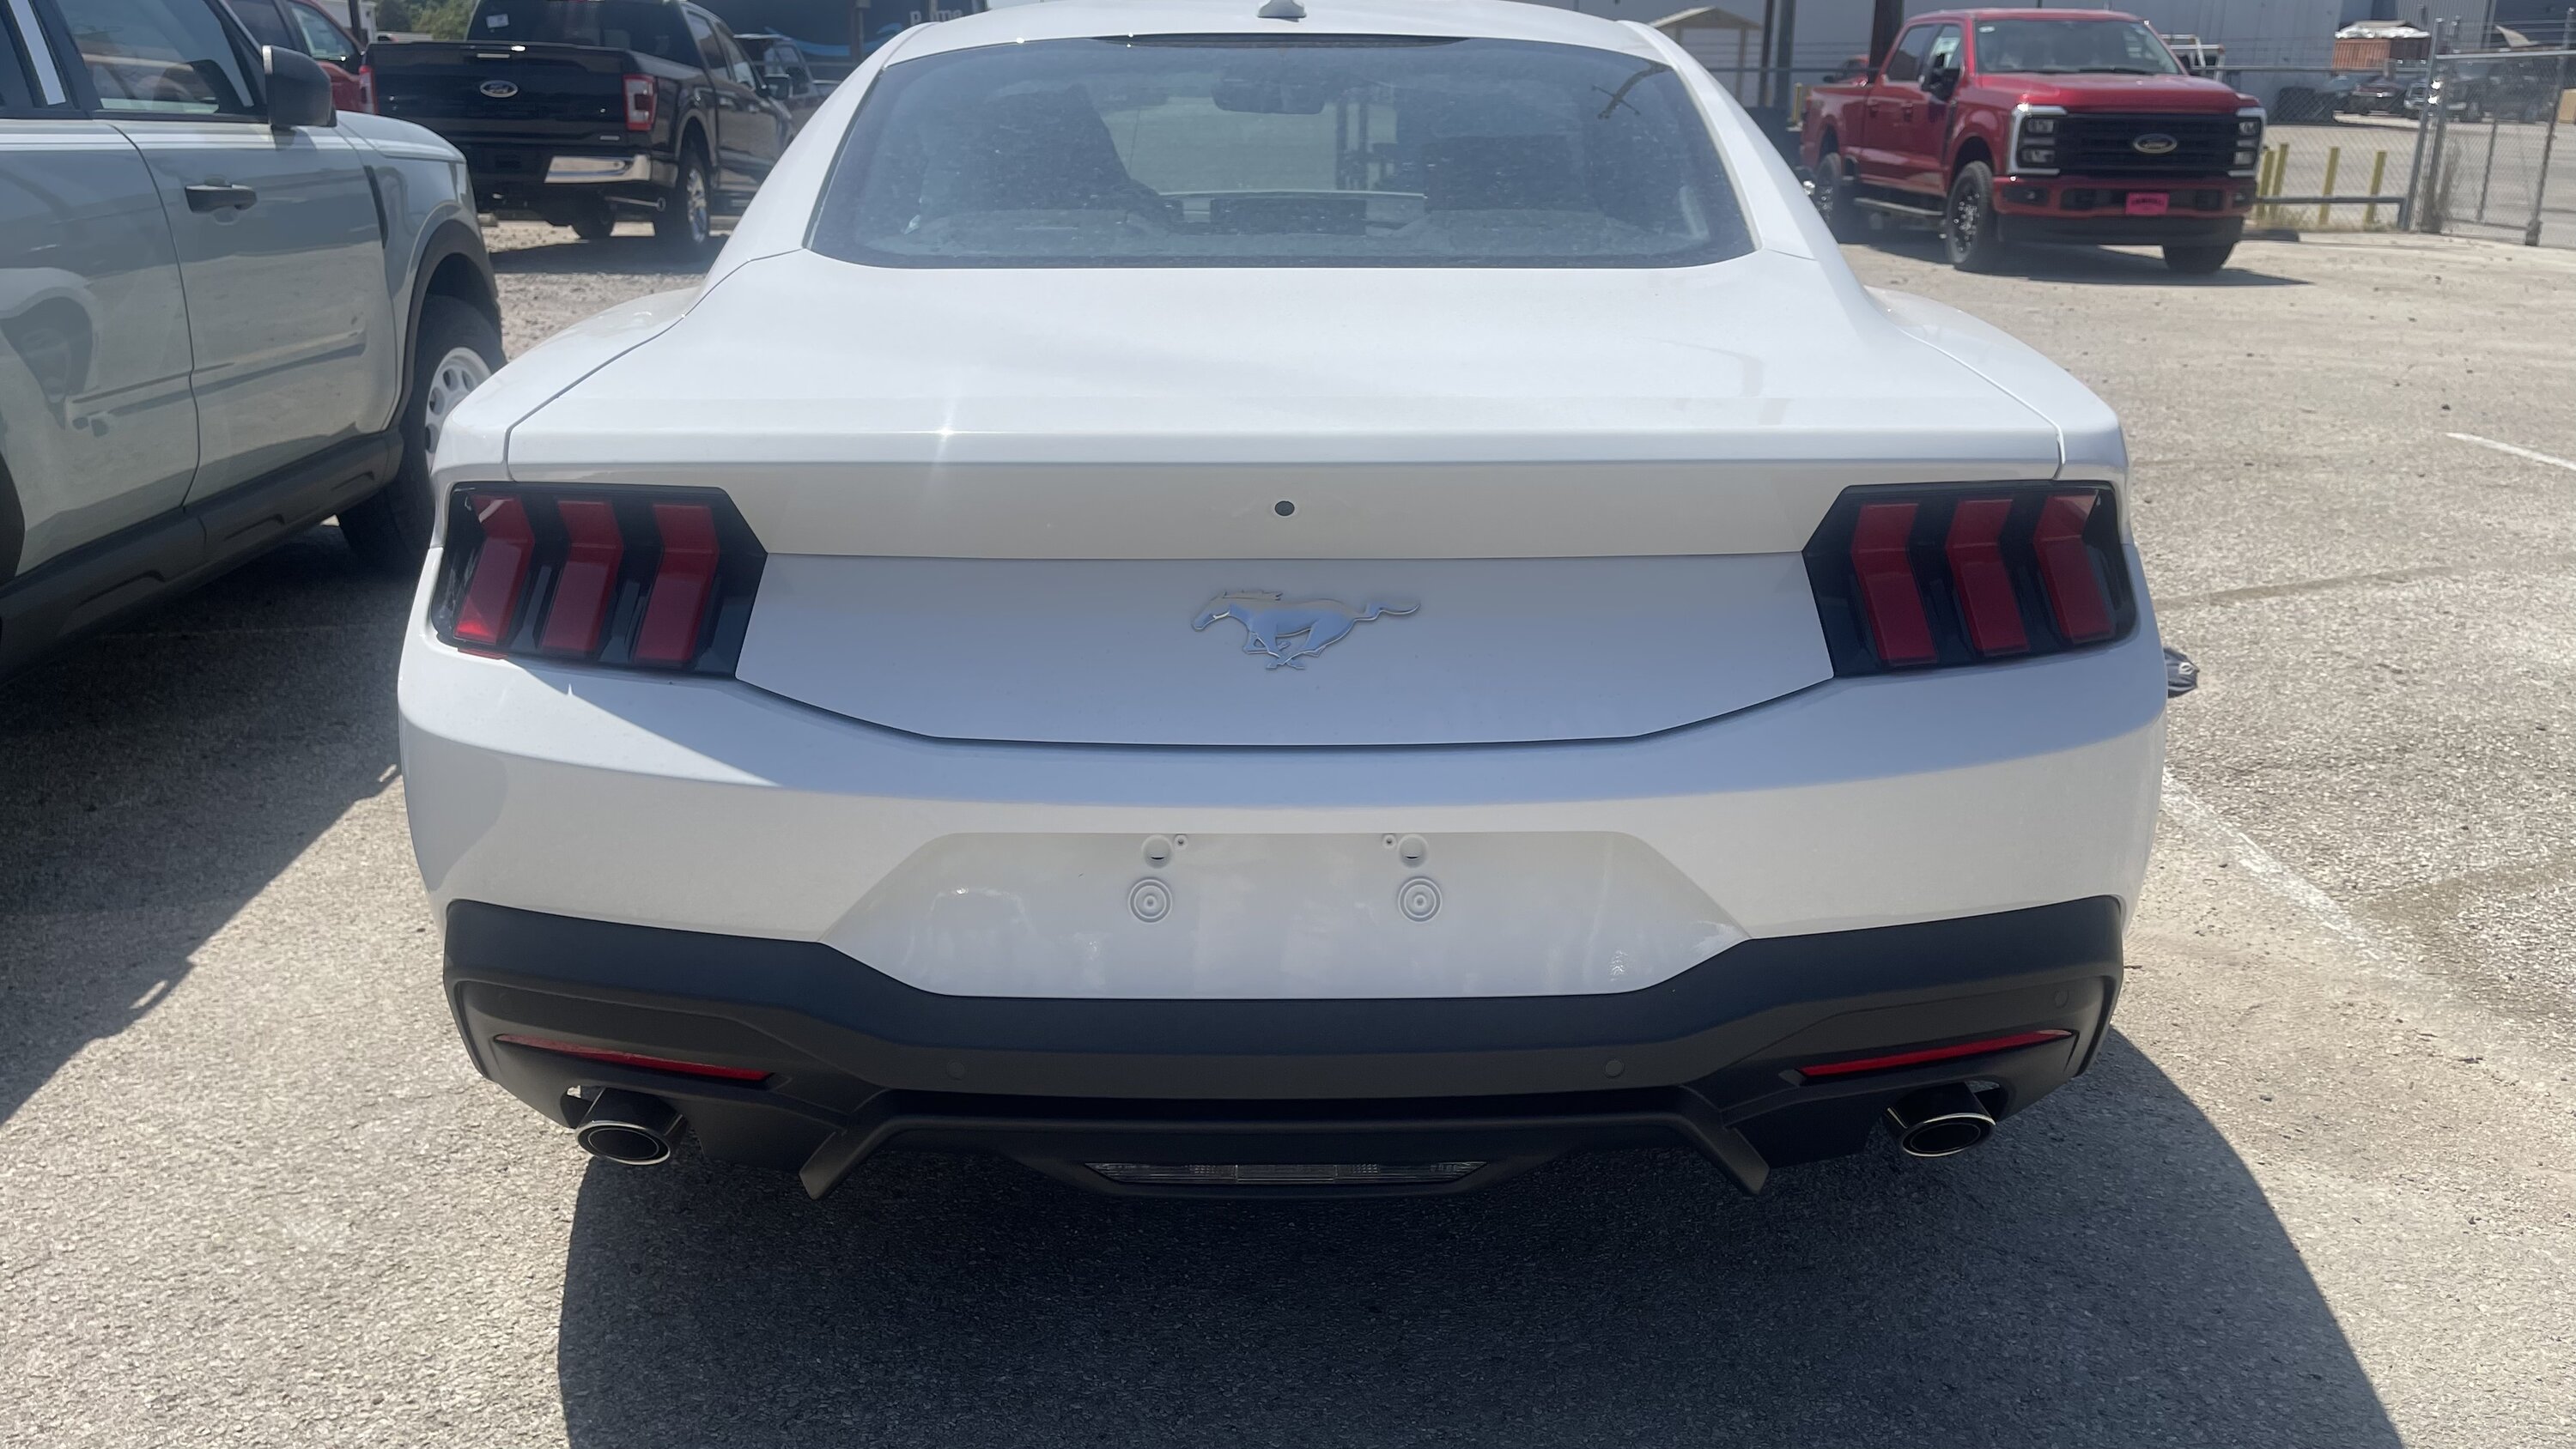 S650 Mustang S650 in Houston @ Tomball Ford 9C7004C6-FC4F-4434-A1F3-BD05B9625E4C